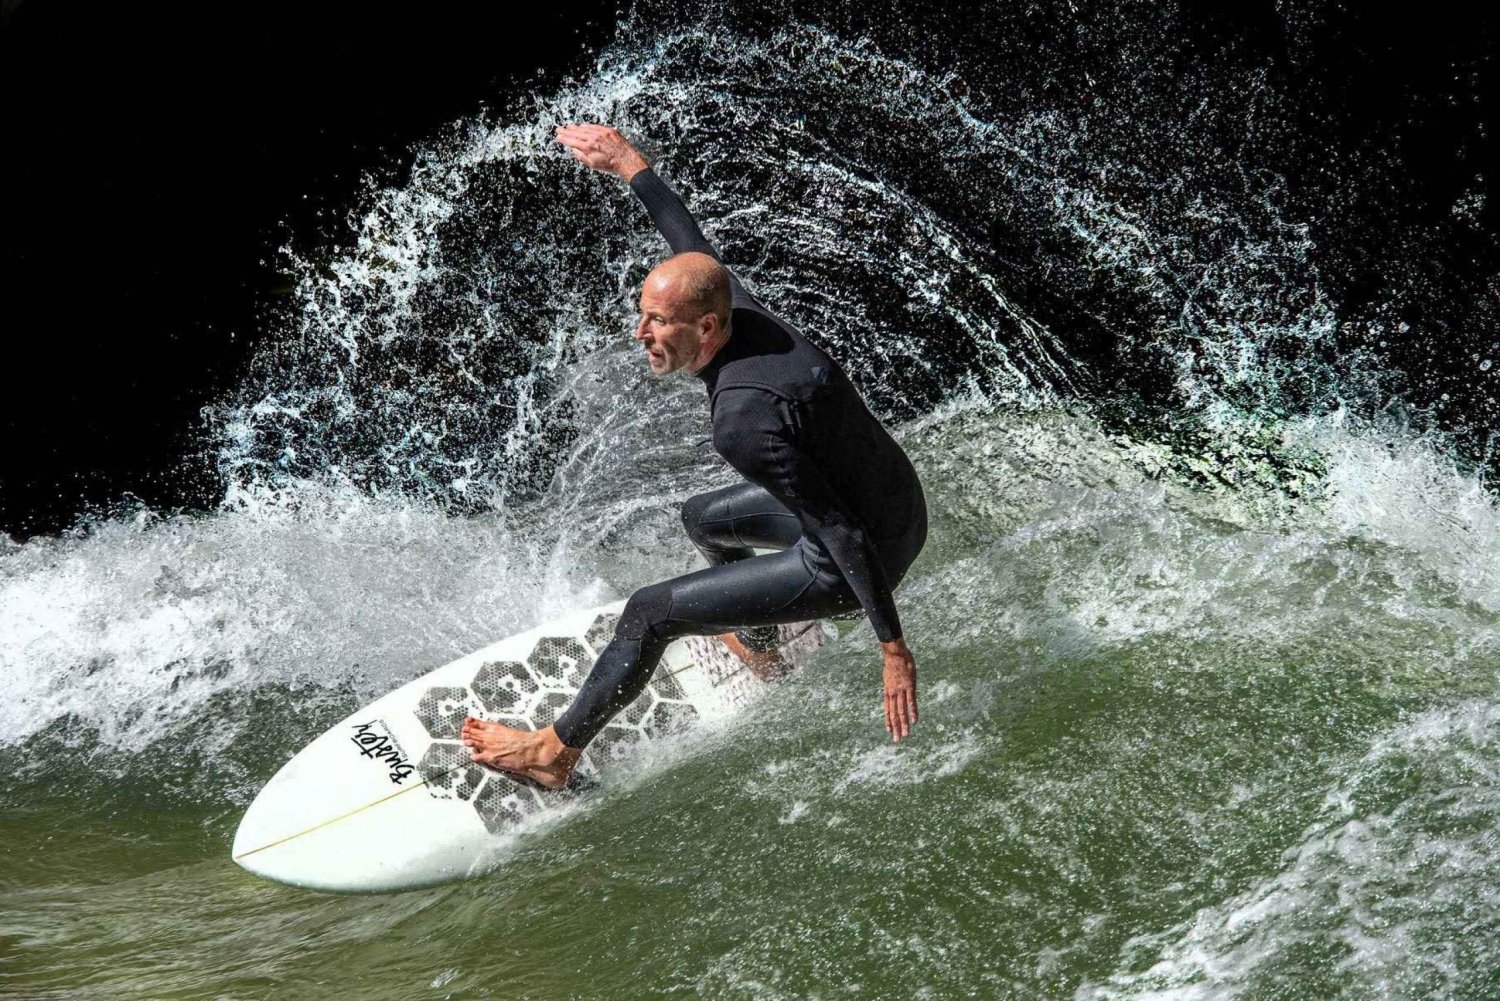 Eisbachwelle: Surfing in the center of Munich - Germany